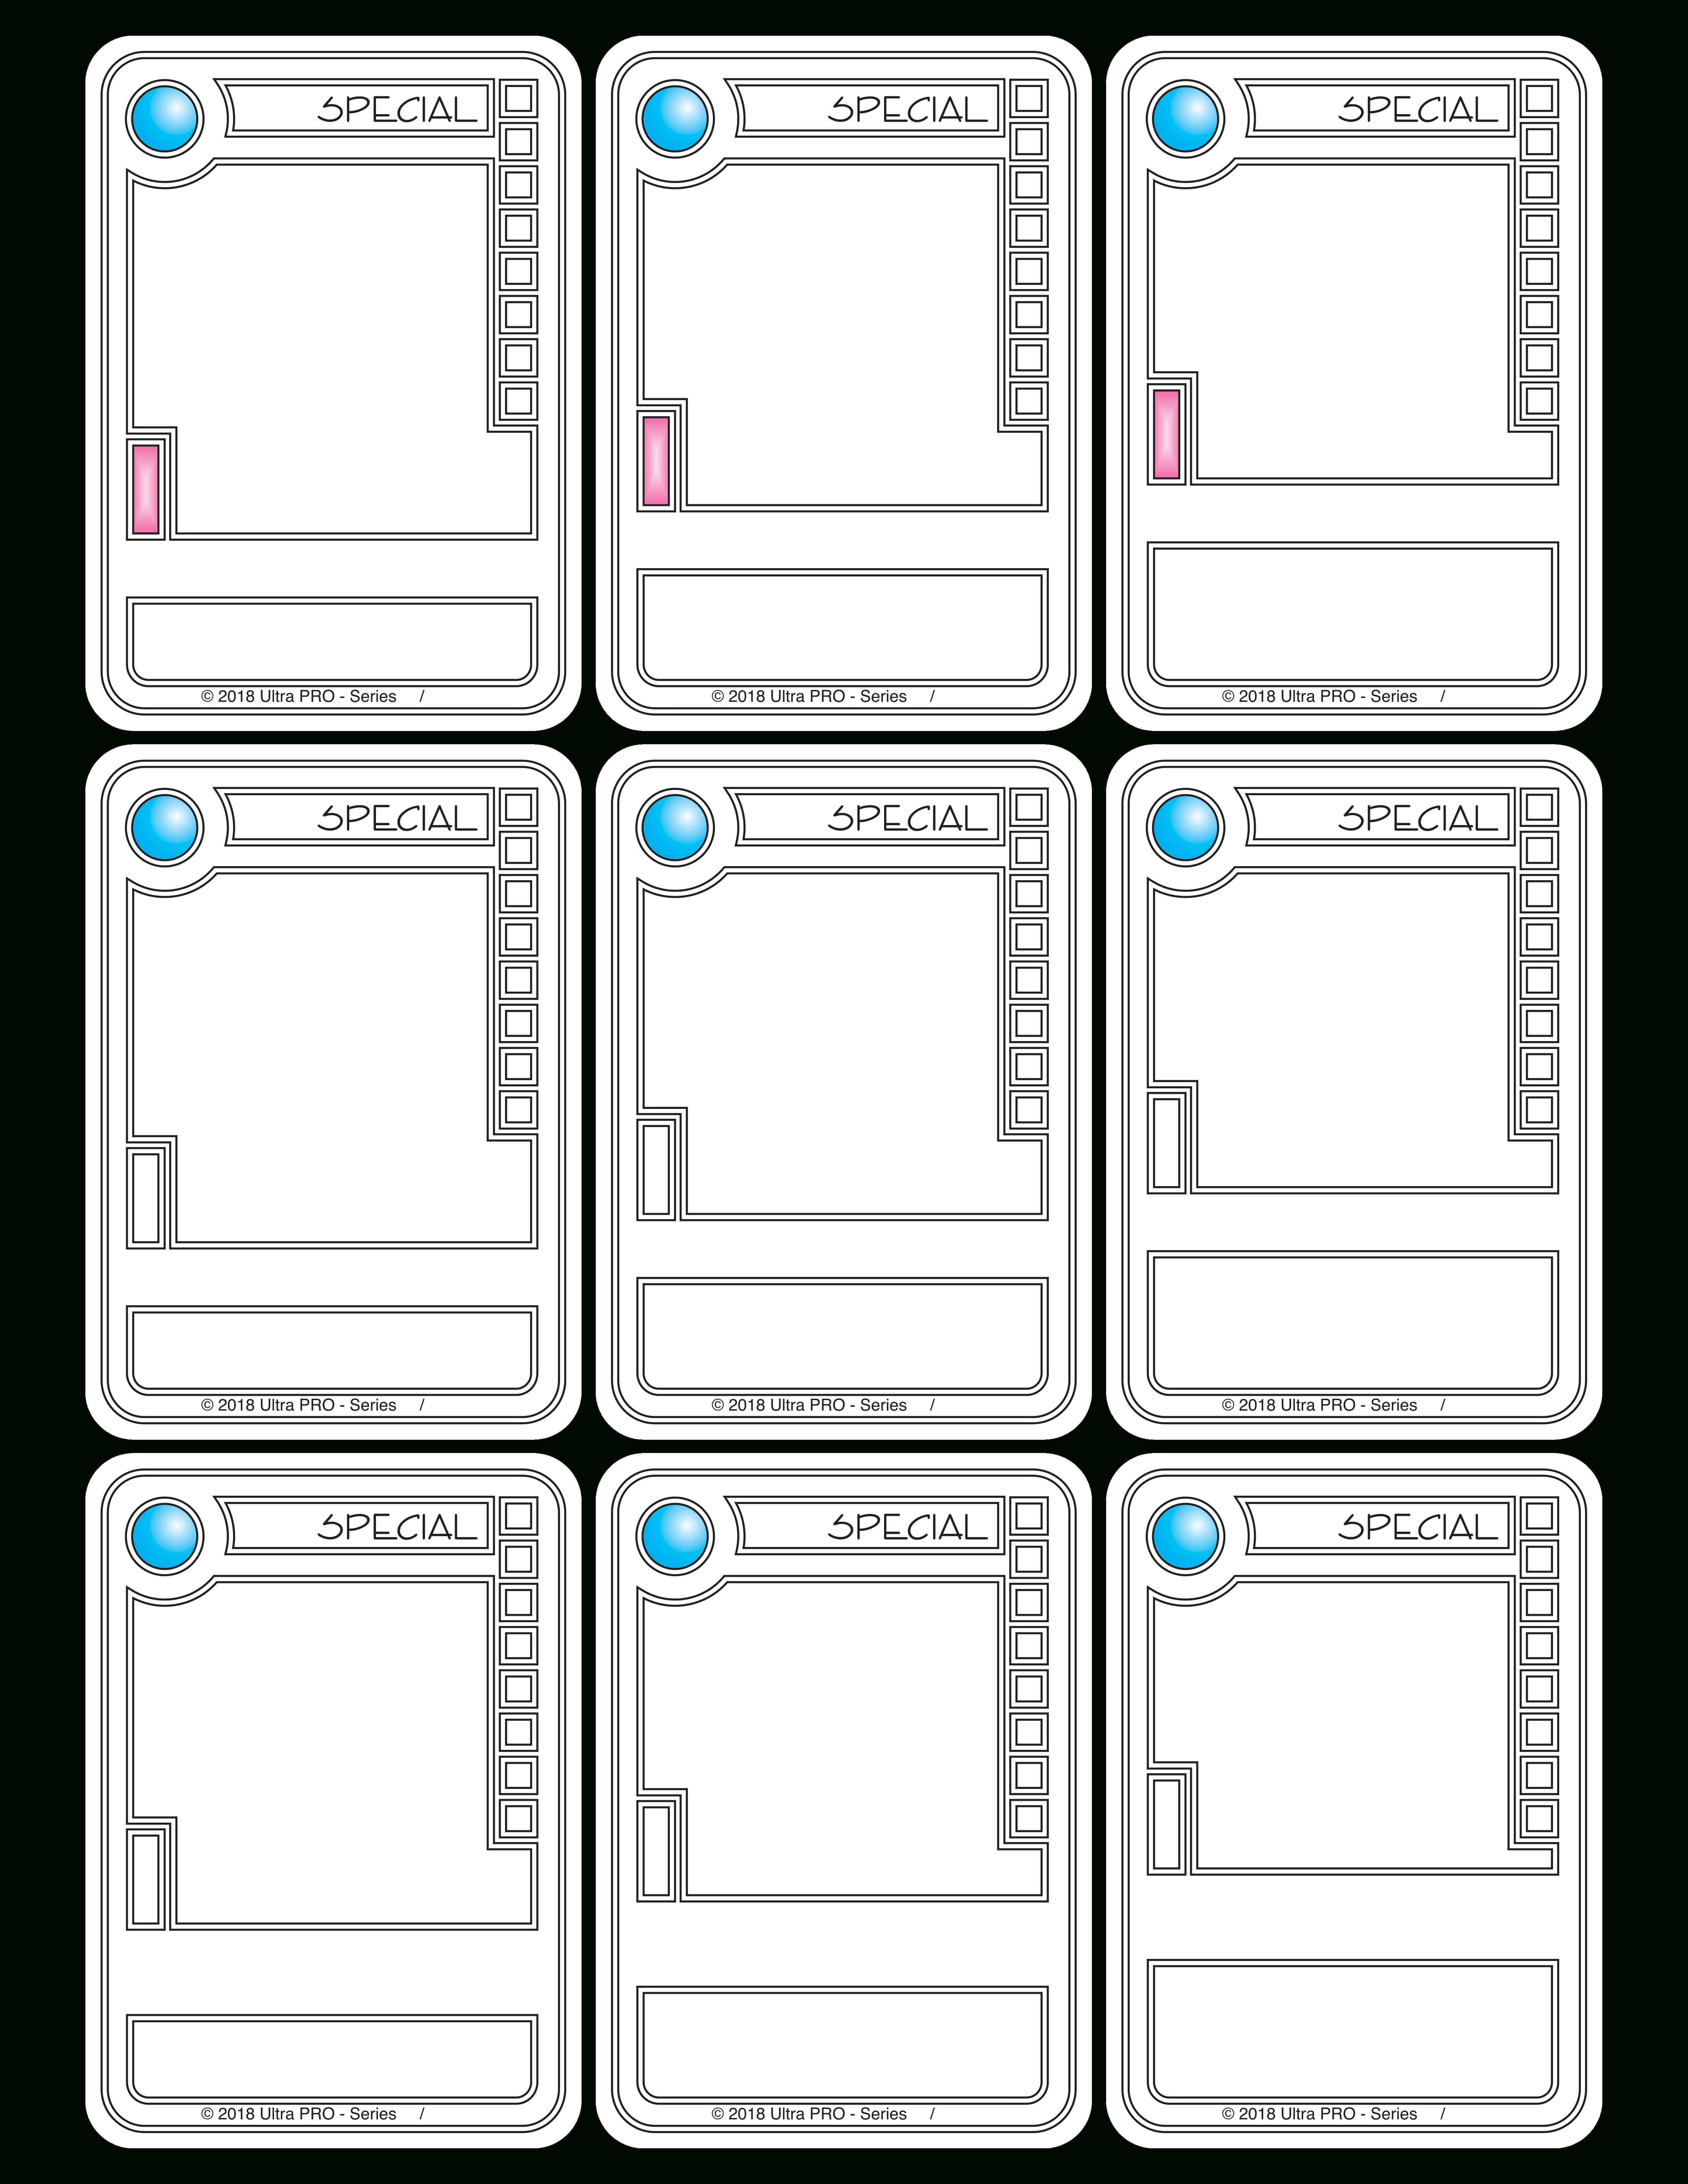 Trading Card Game Template Regarding Template For Game Cards